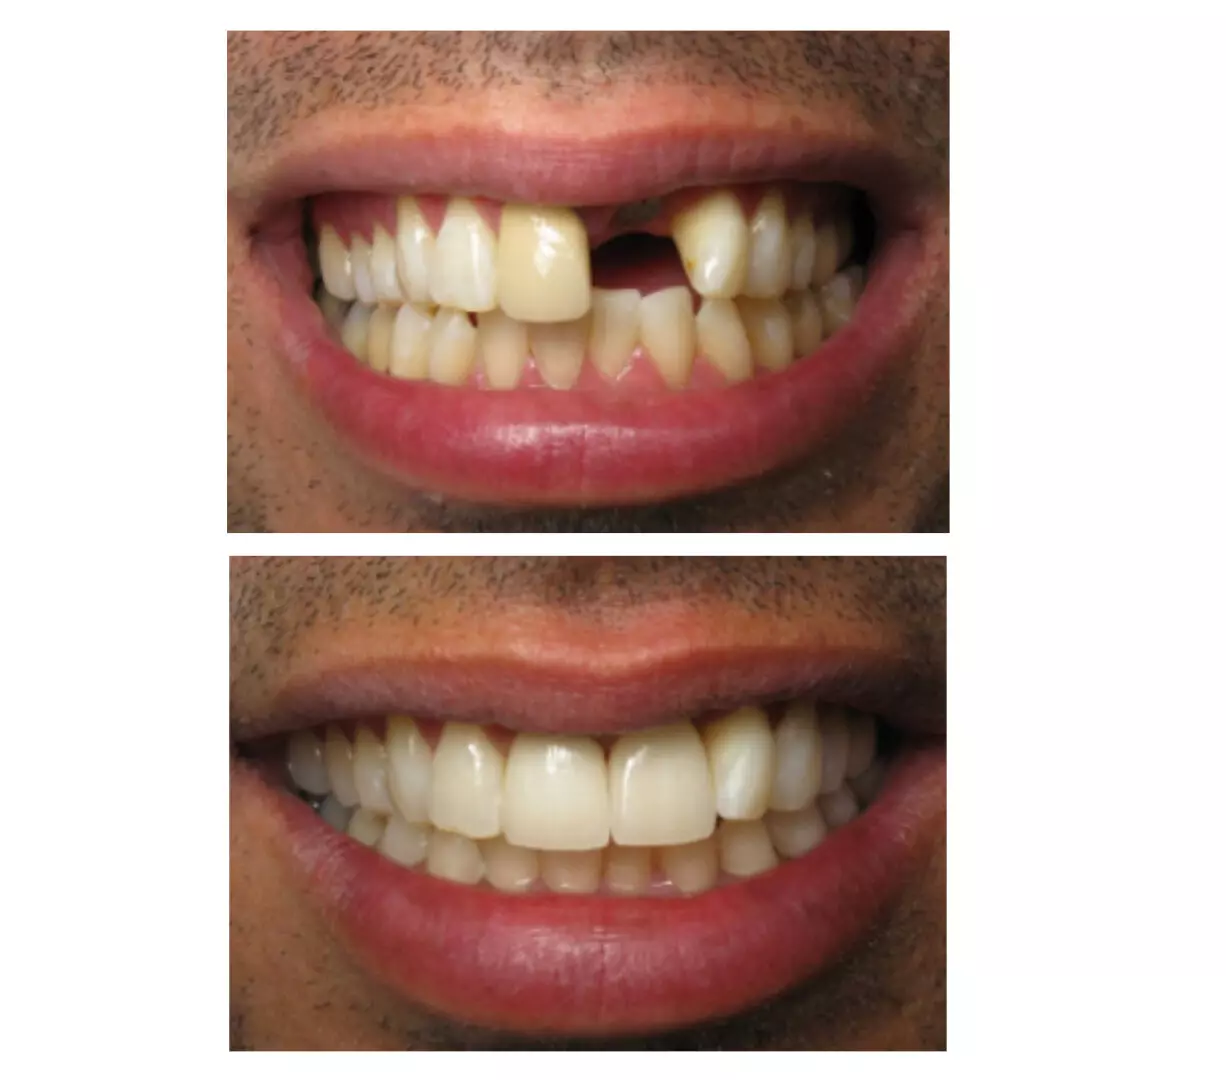 Before and after photos of our dental implant services